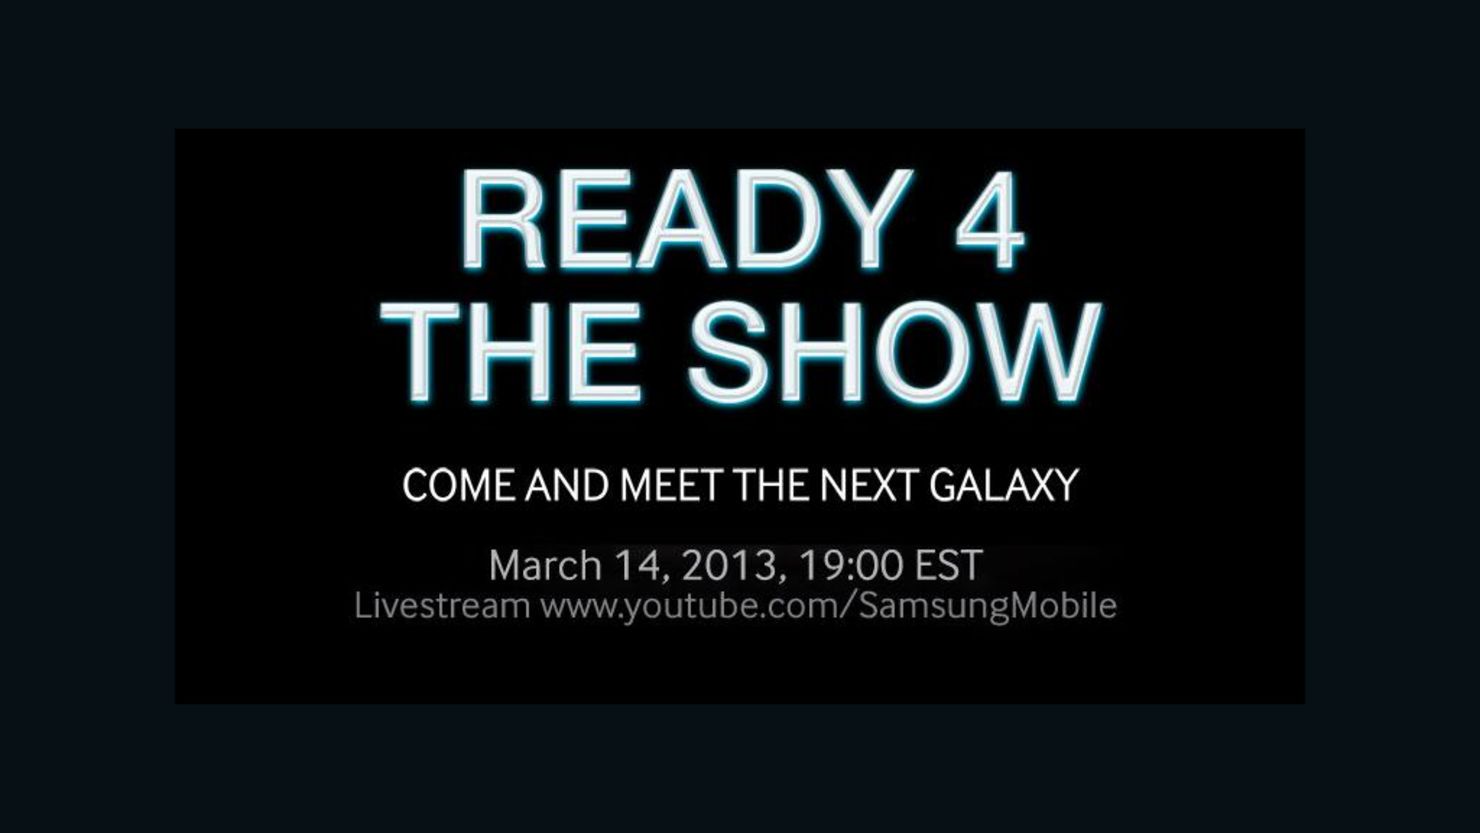 In a promo for its March 14 event, Samsung strongly hinted it will unveil the successor to its popular Galaxy S III phone.